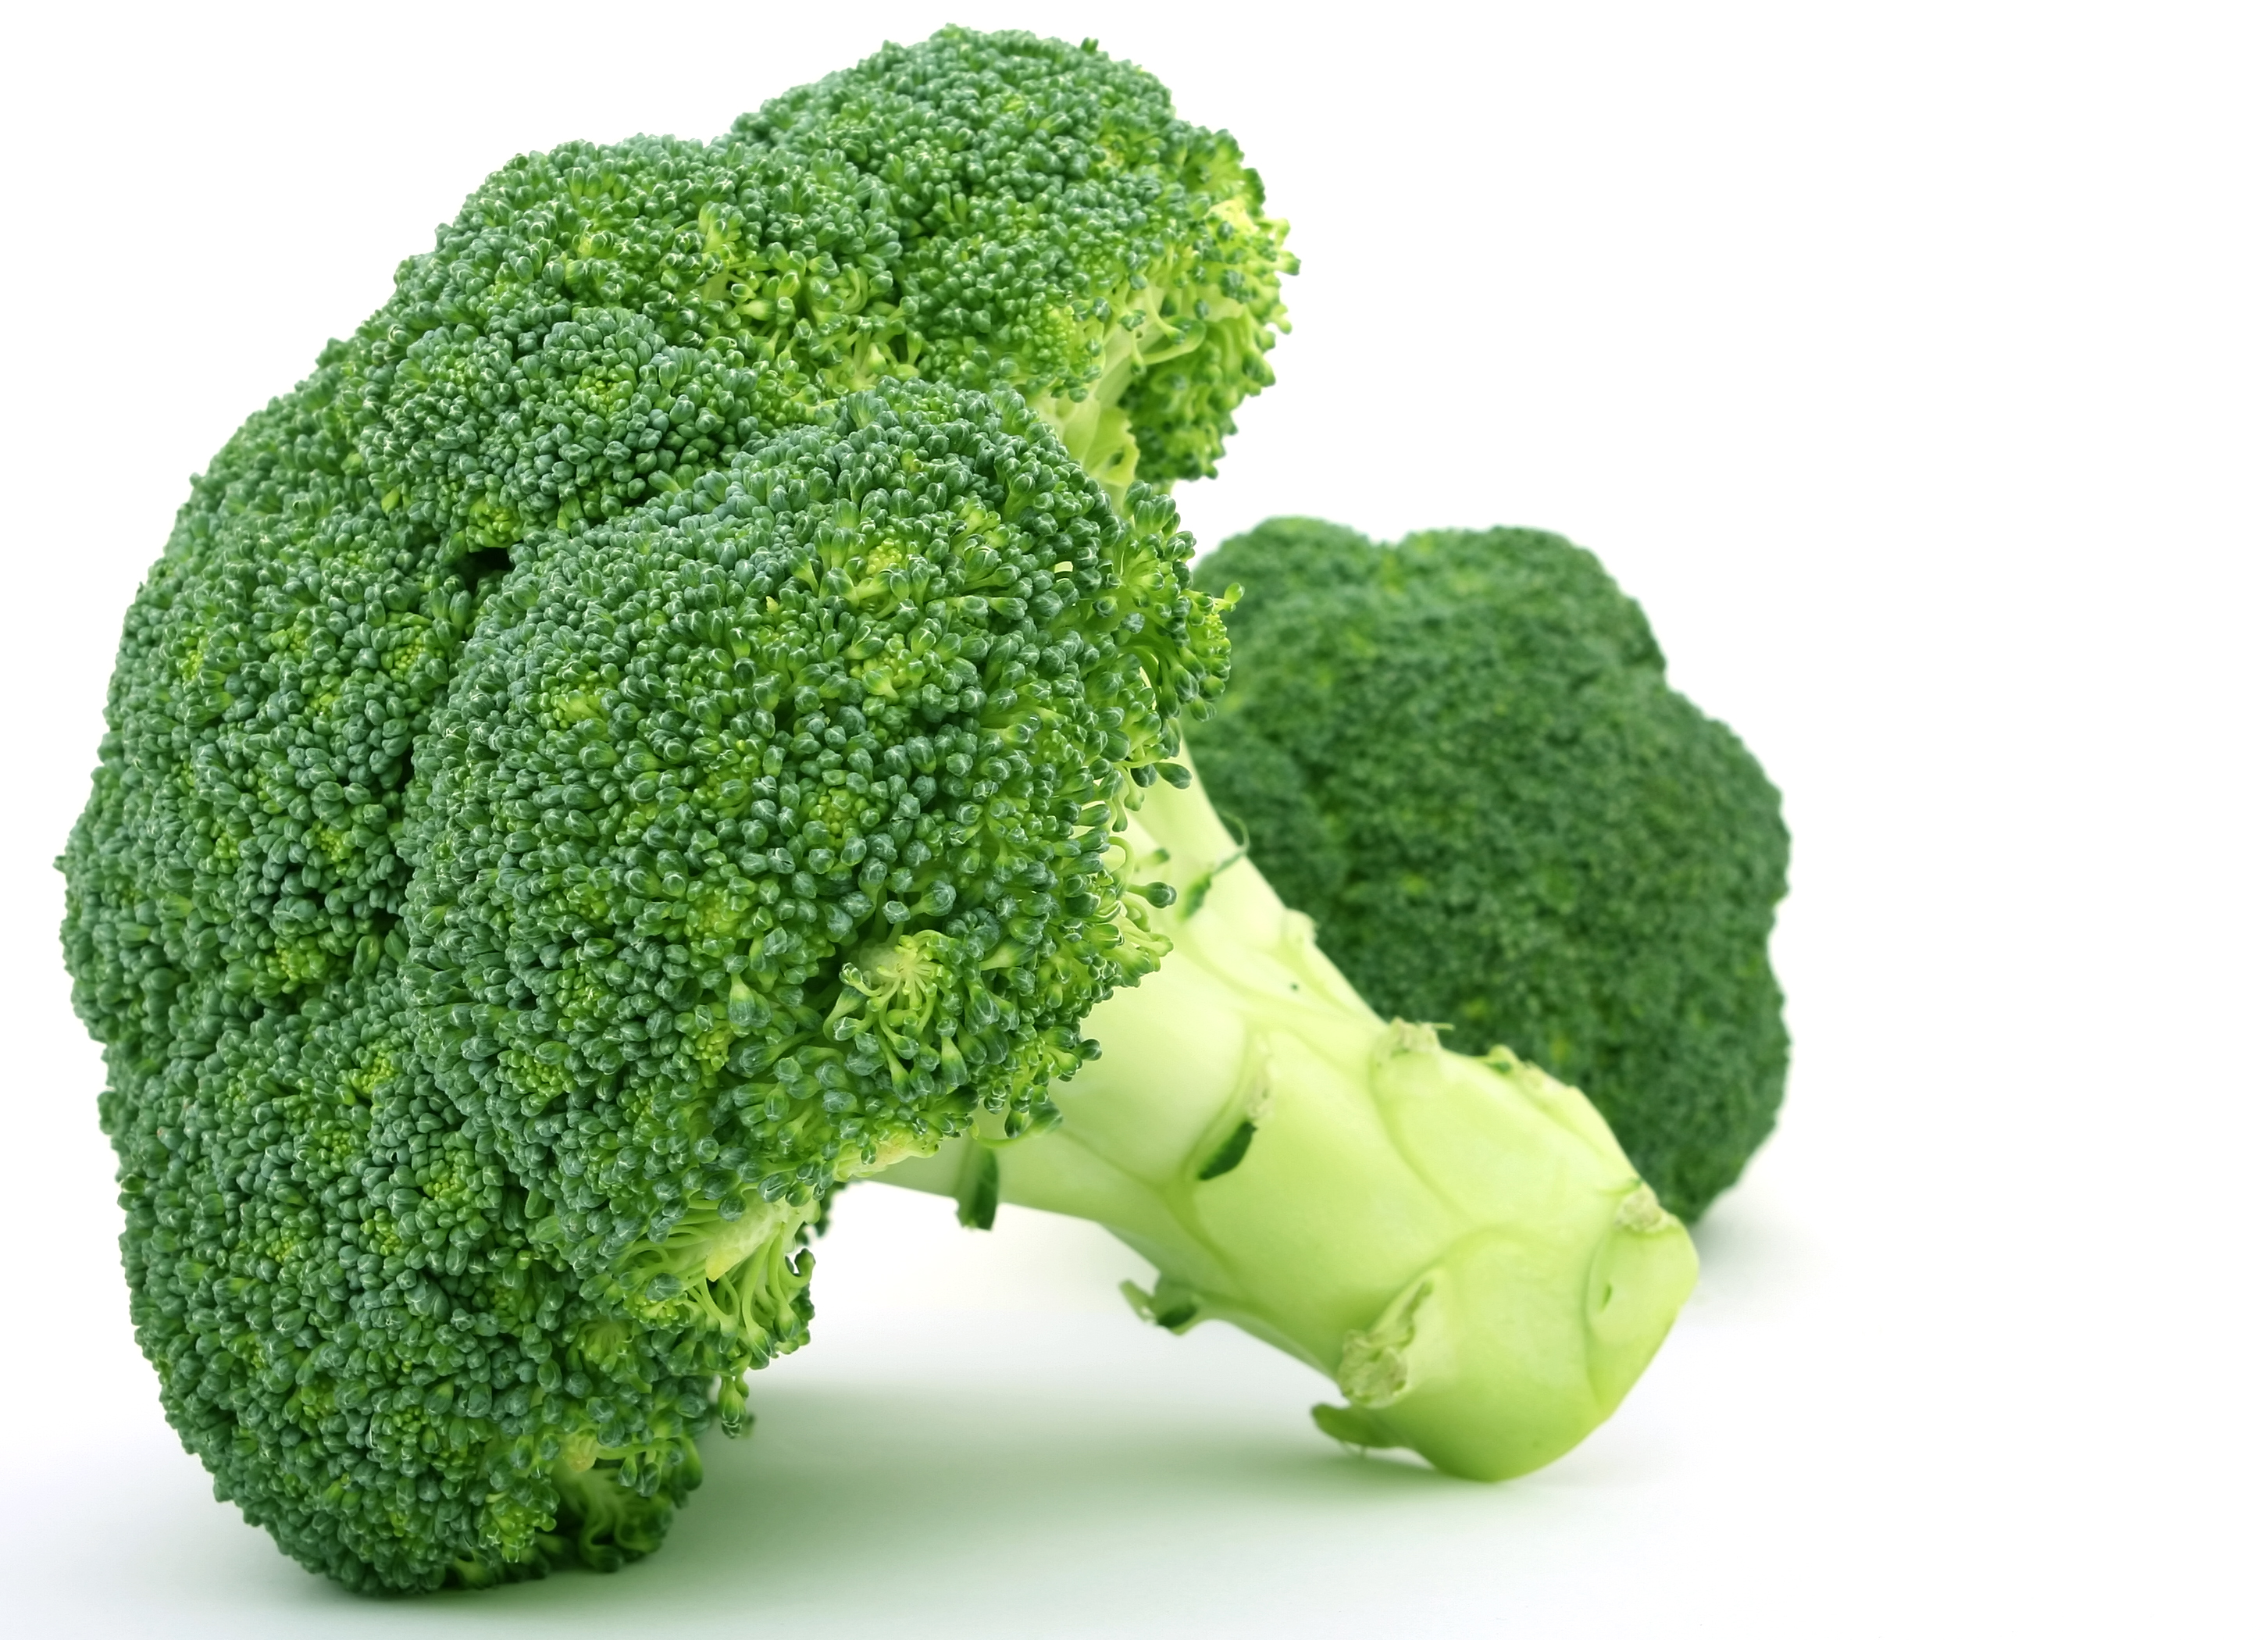 Amazing Broccoli Pictures & Backgrounds